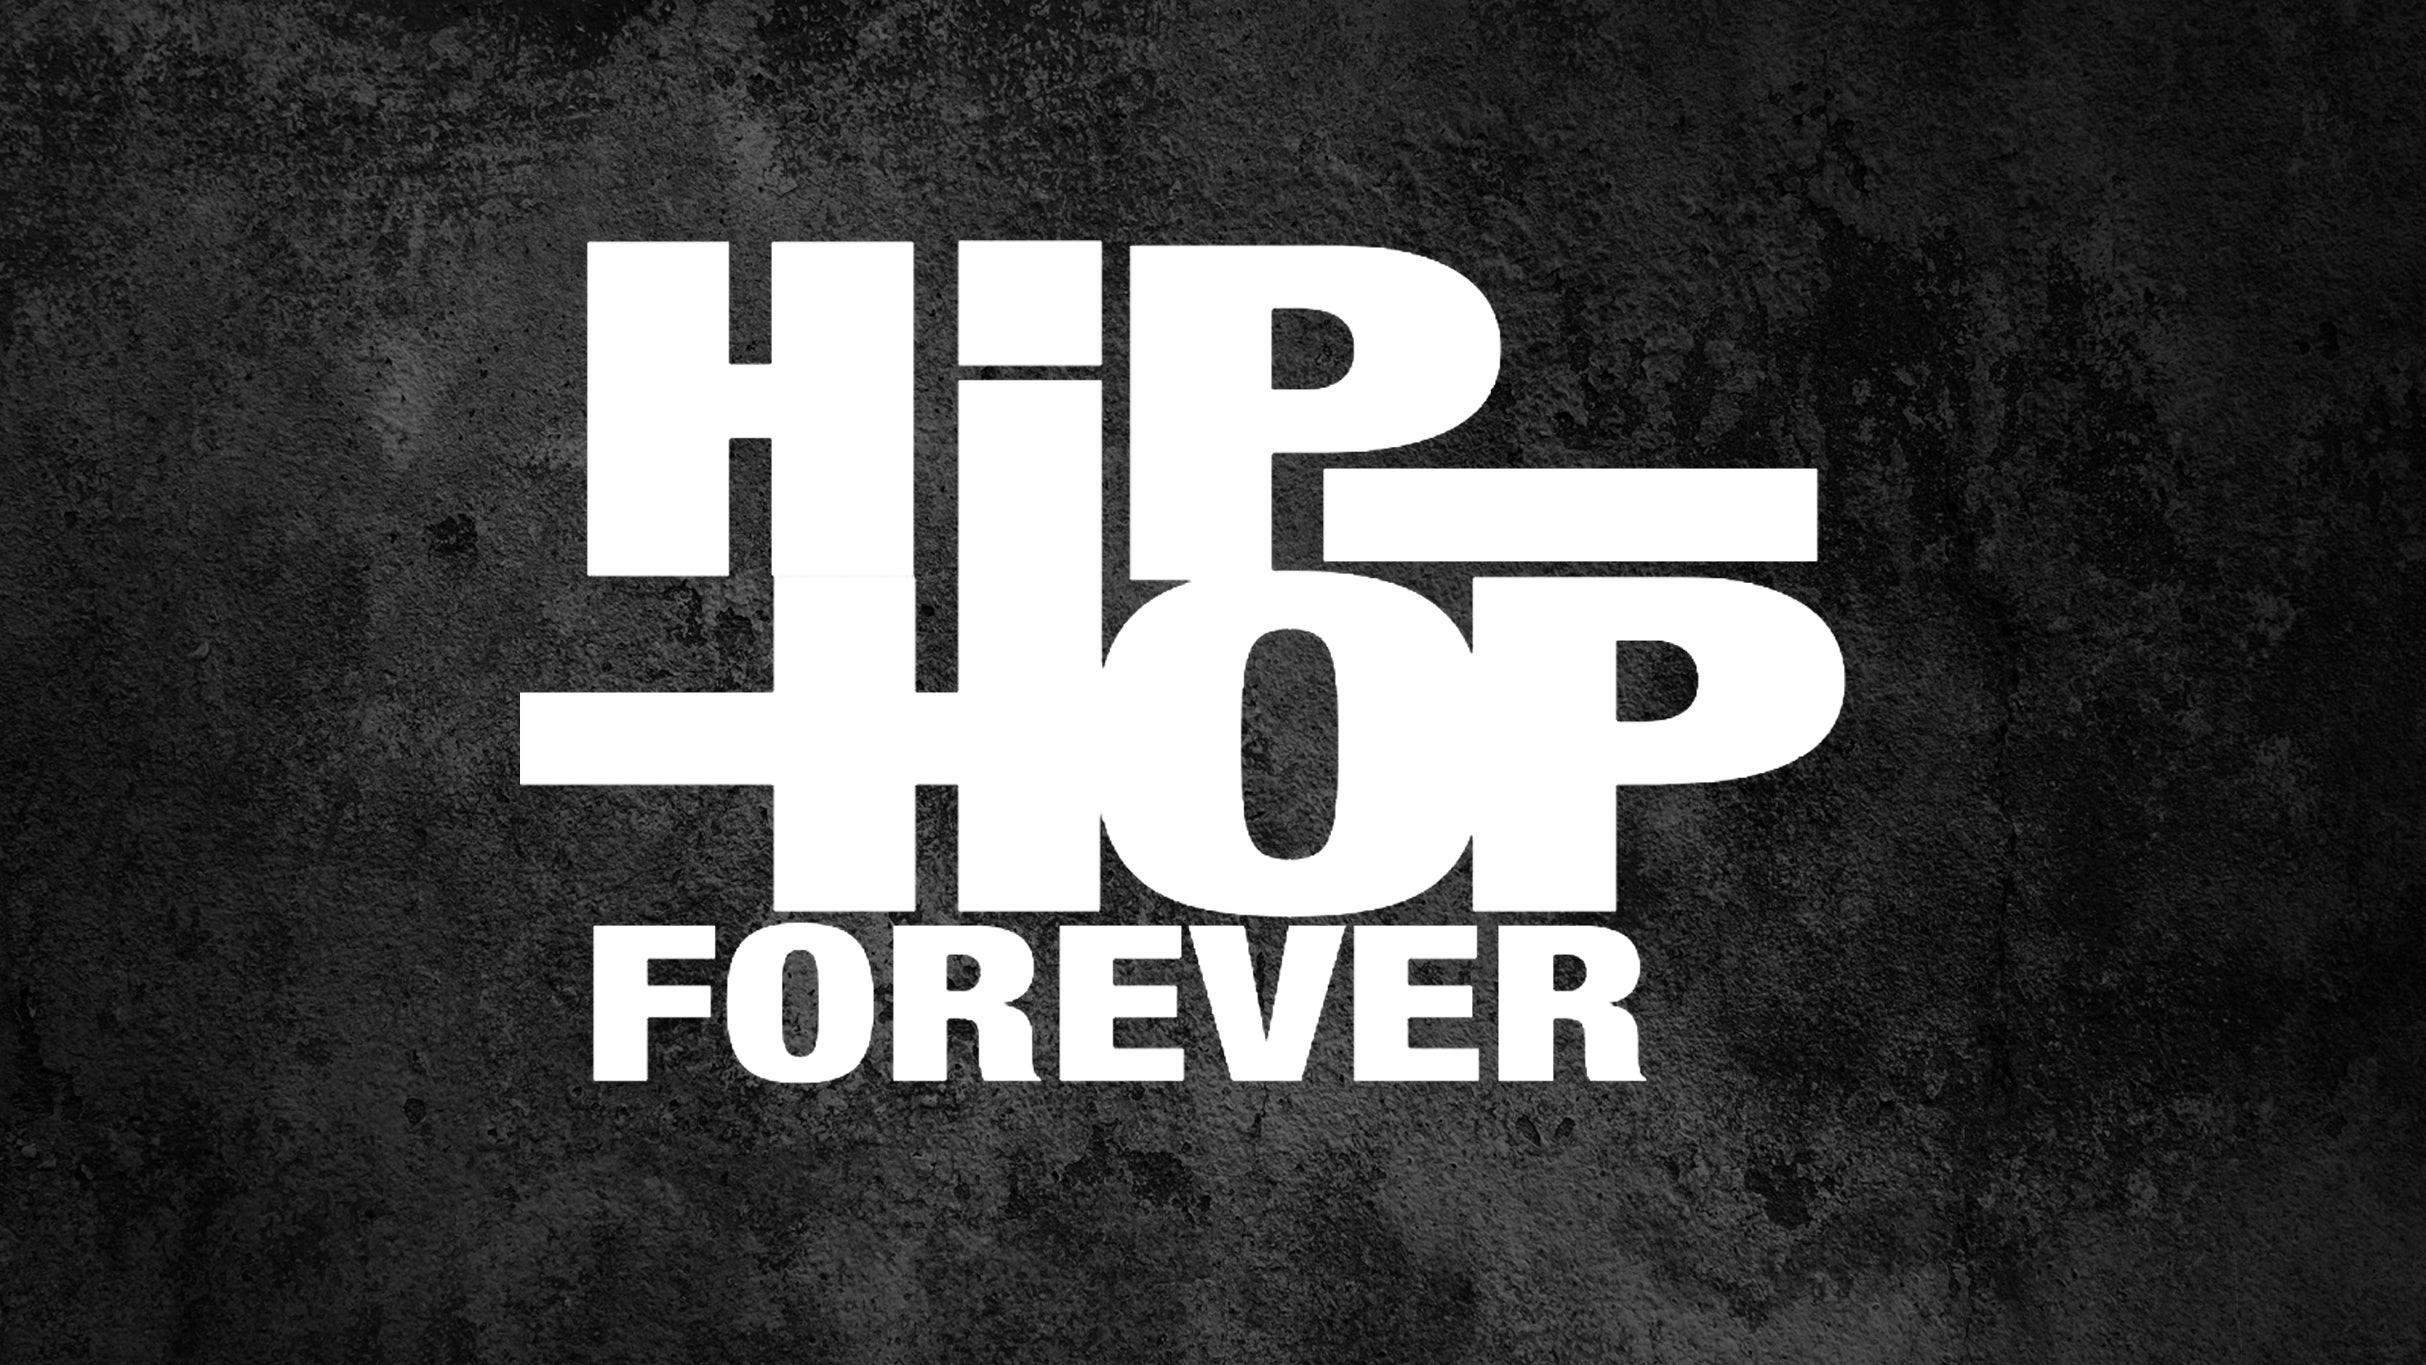 Hot 97 & WBLS Present Hip Hop Forever ft. Wu Tang, Mary J Blige + more free presale password for early tickets in New York